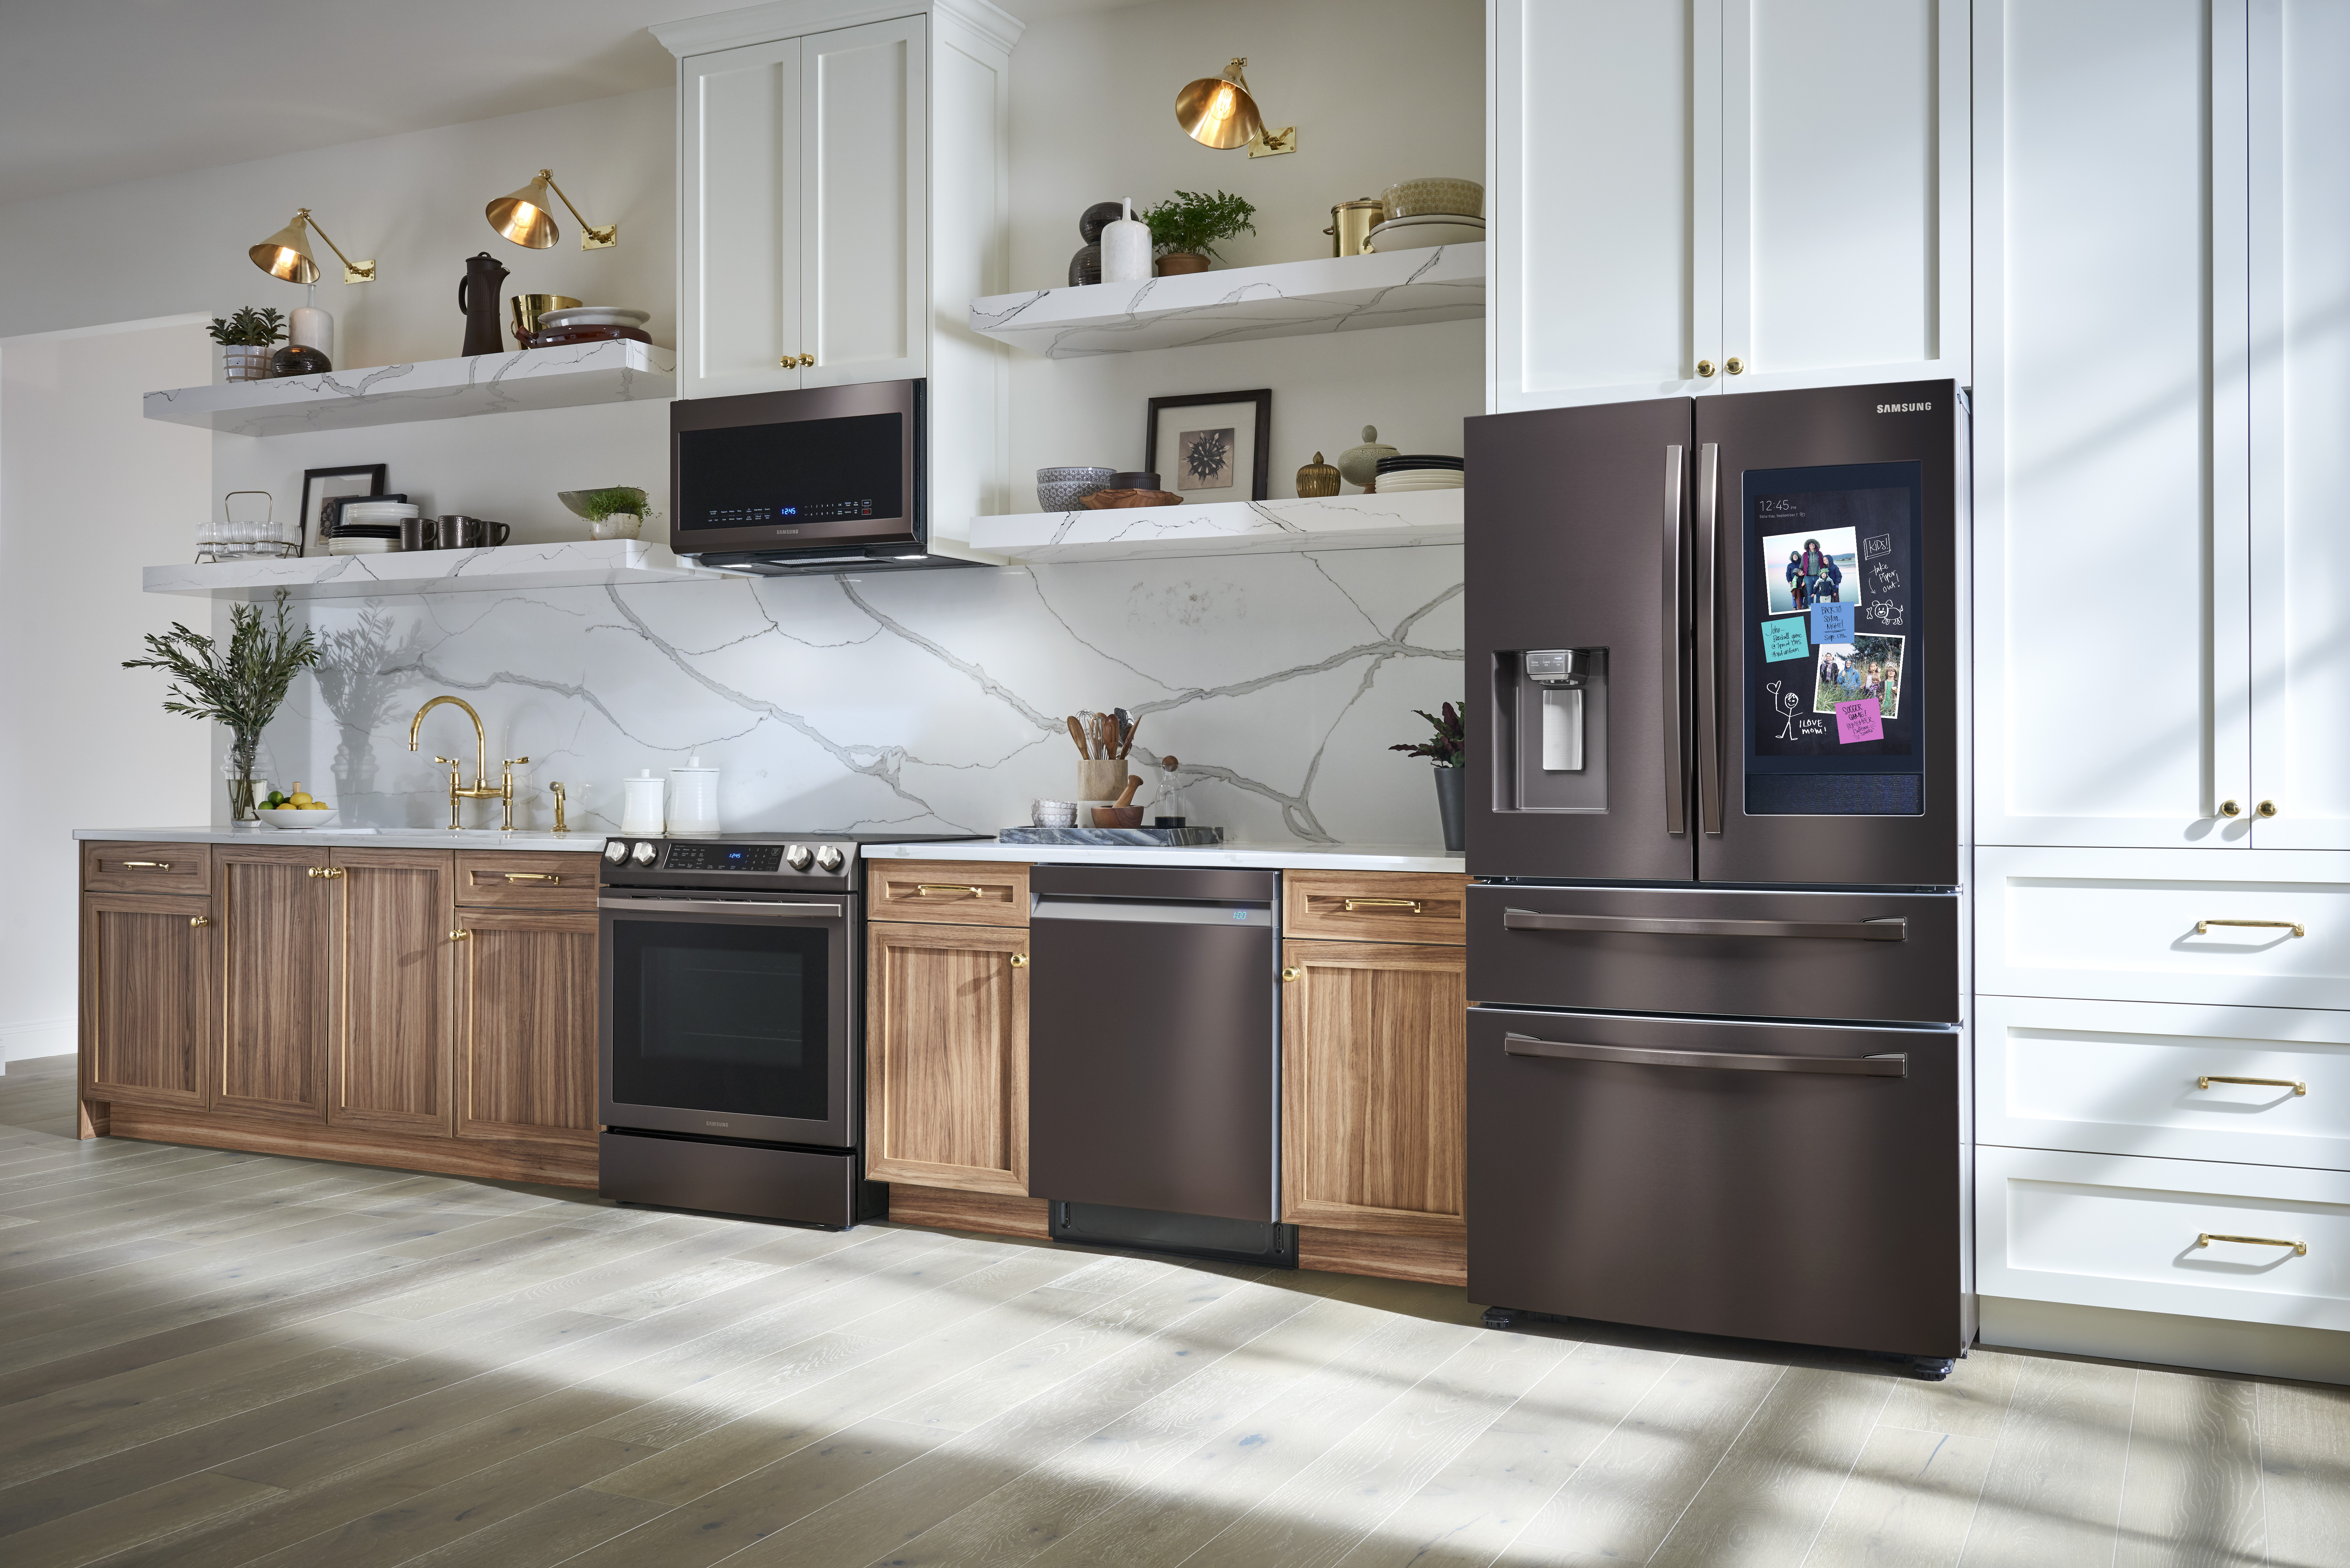 Tuscan stainless-steel kitchen appliance package in sunlit kitchen